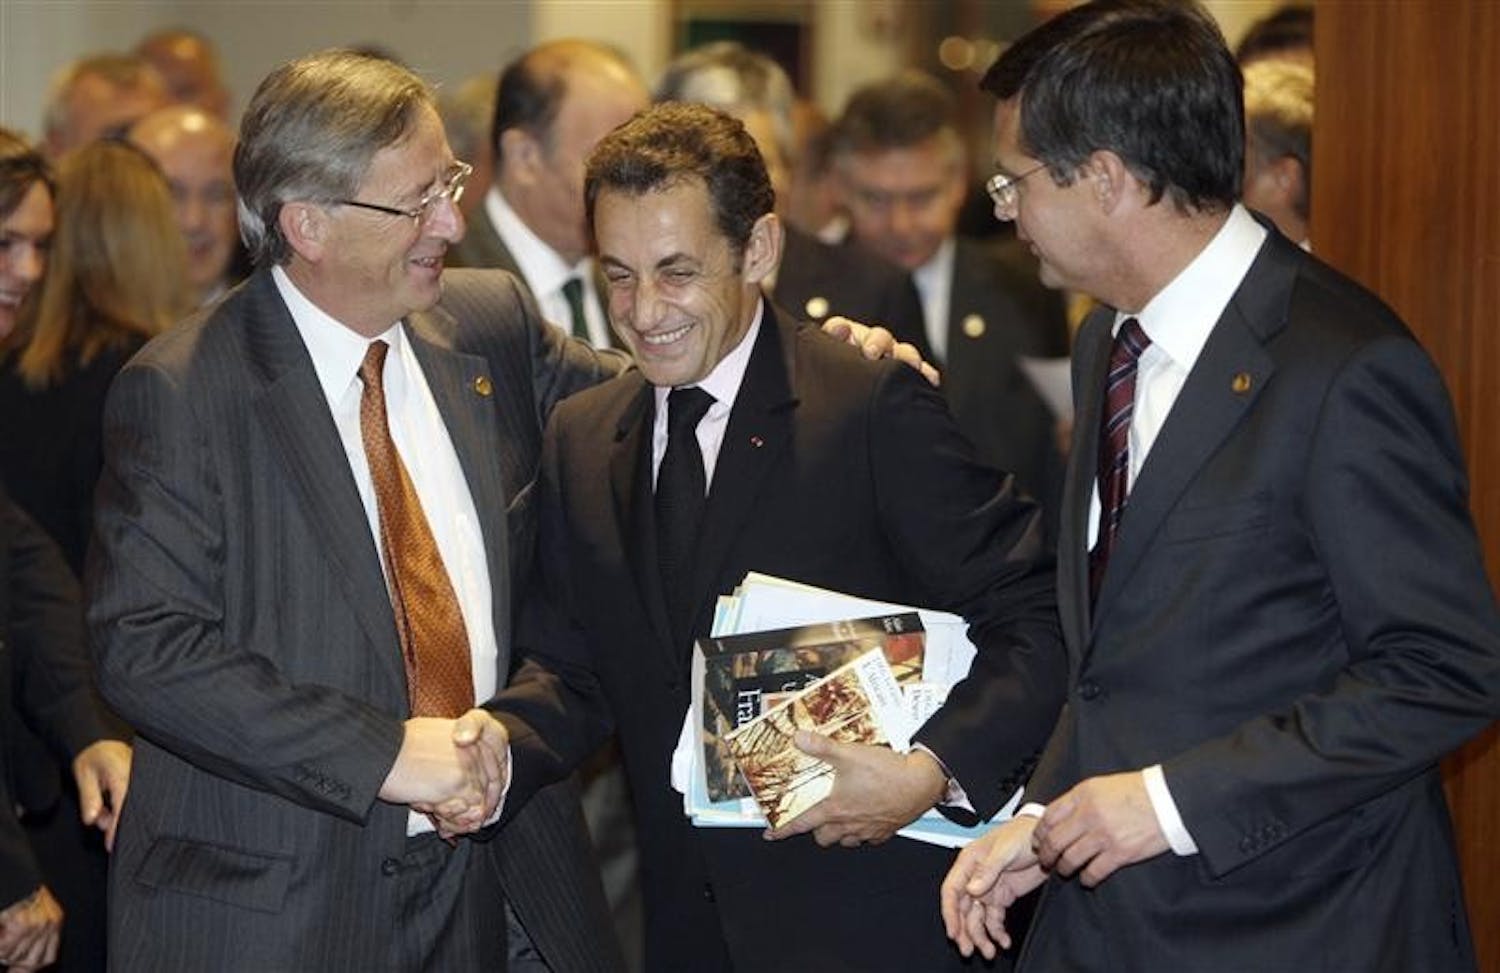 French President Nicolas Sarkozy, center, shares a word with Luxembourg's Prime Minister Jean Claude Juncker, left, and Dutch Prime Minister Jan Peter Balkenende as they enter a round table meeting Wednesday during an EU summit in Brussels. Efforts to calm the impact of the global financial crisis will top the agenda at a two-day EU leaders summit along with talks on how the 27-nation bloc can keep on track ambitious promises to cut greenhouse gas emissions by 20 percent by 2020.